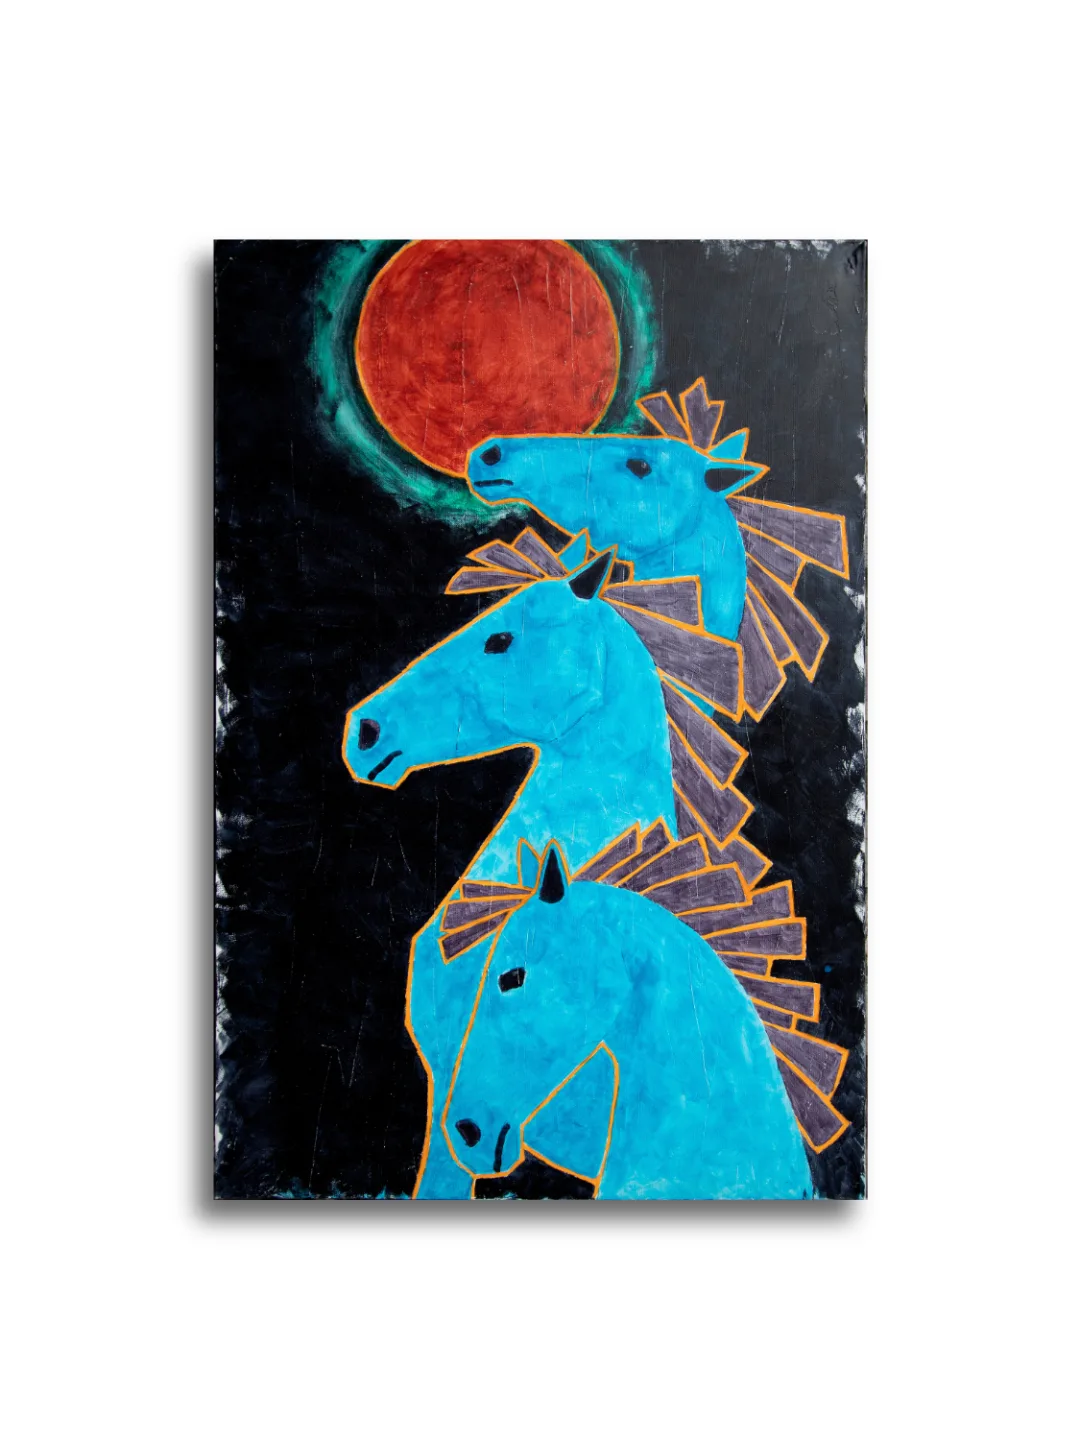 Blauen Pferde (Blue Horses) by Ann Richmond - A stunning, Original artwork featuring a stylised trio of Blue Horses in an expressive style... Framing available.